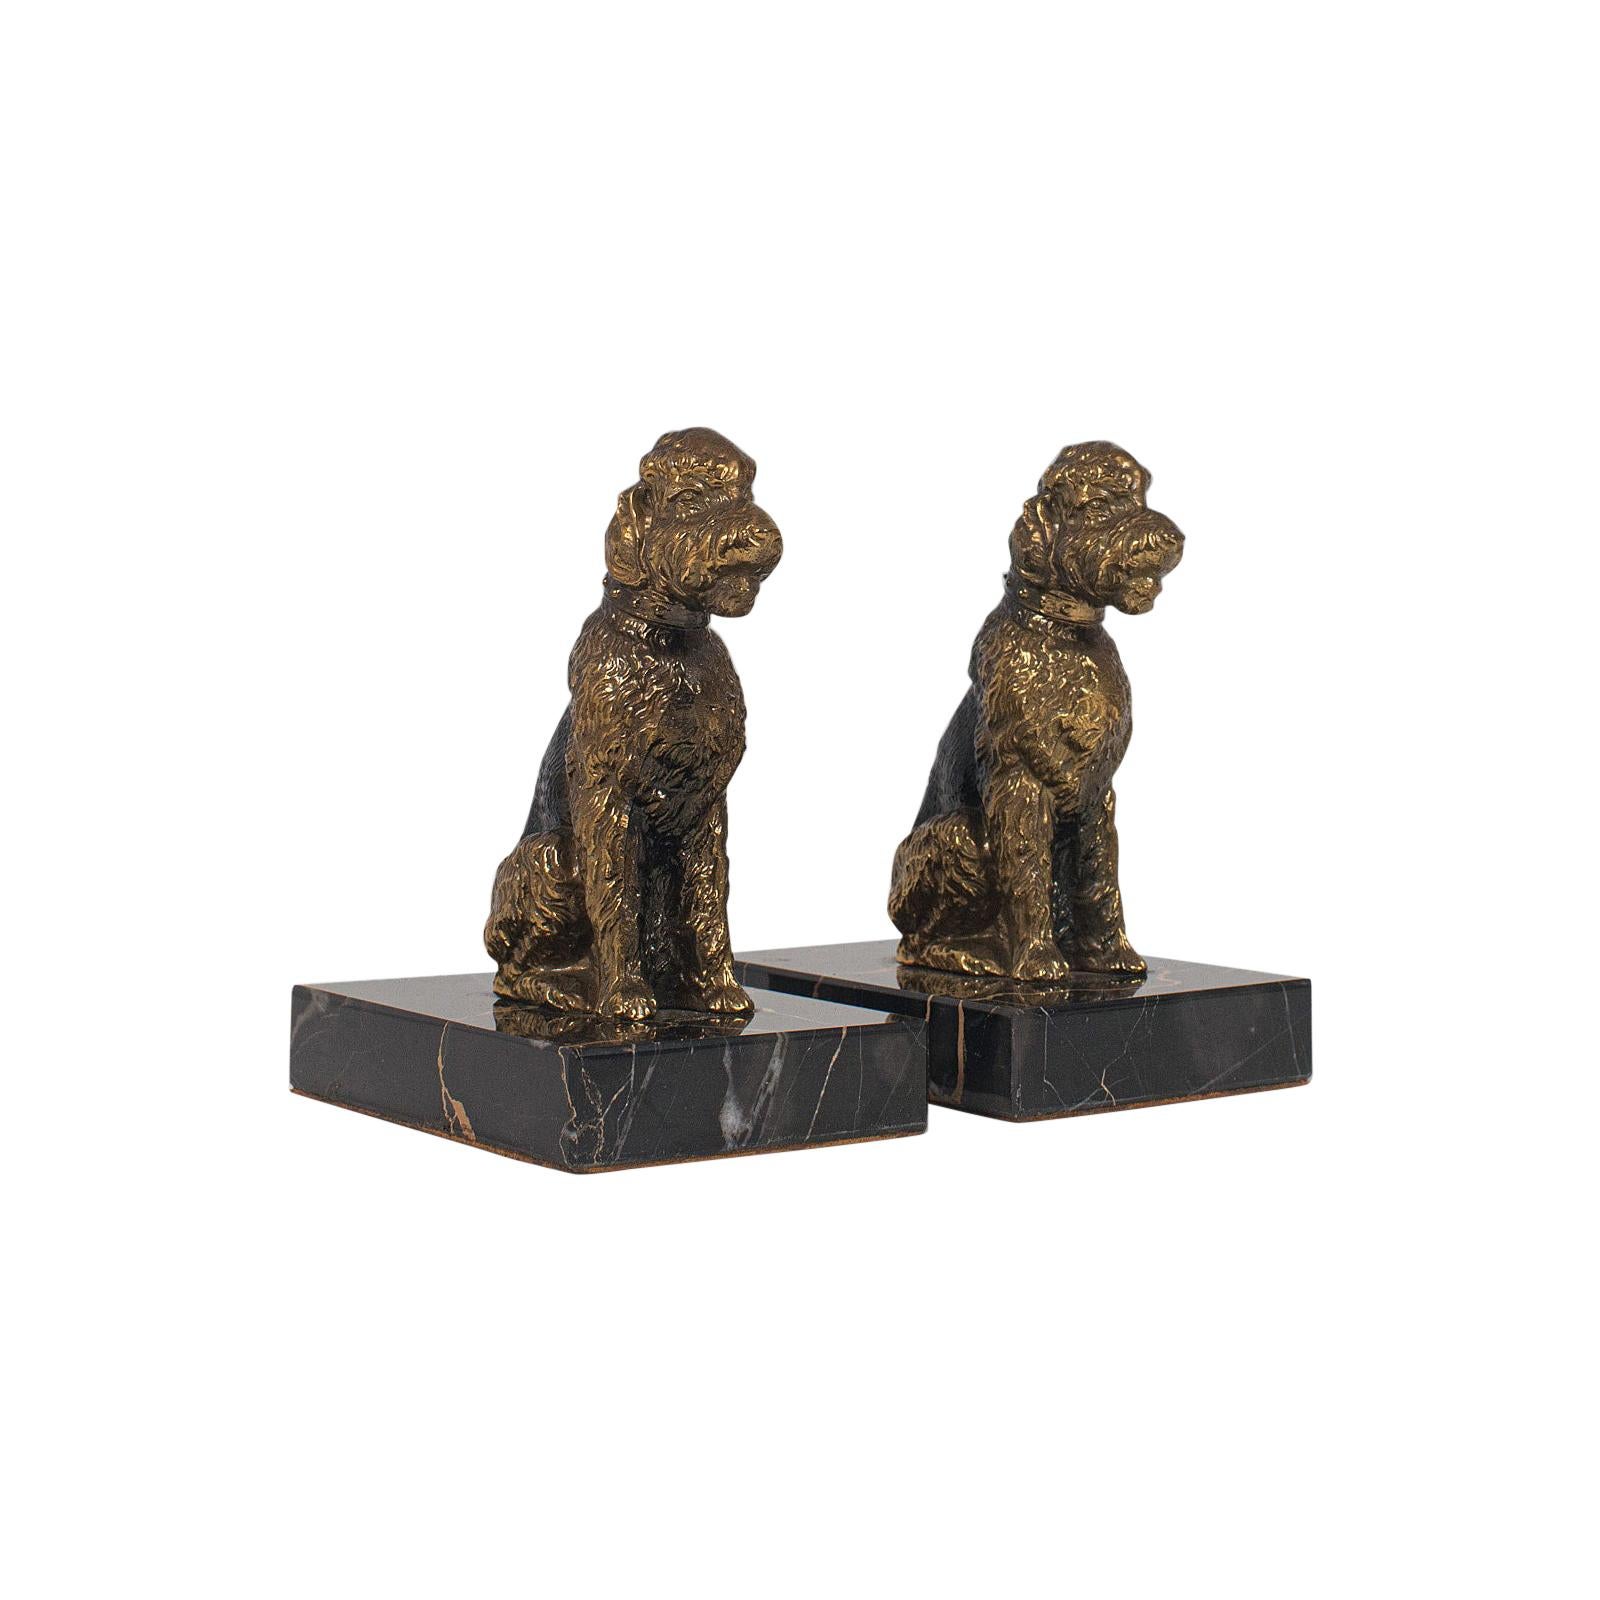 Pair of Vintage Dog Figures, English, Gilt Metal, Airedale Terrier, circa 1980